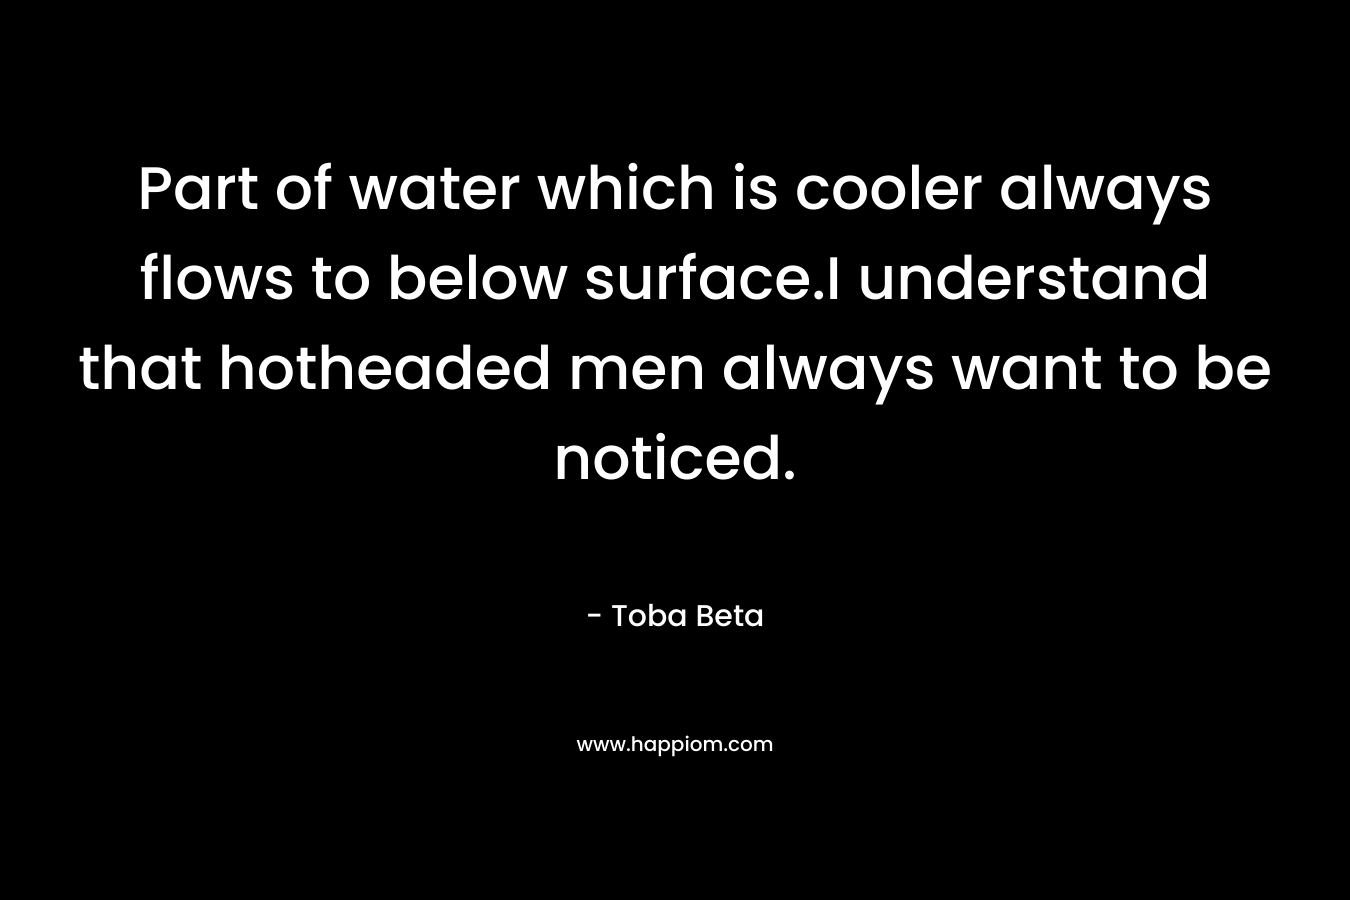 Part of water which is cooler always flows to below surface.I understand that hotheaded men always want to be noticed. – Toba Beta